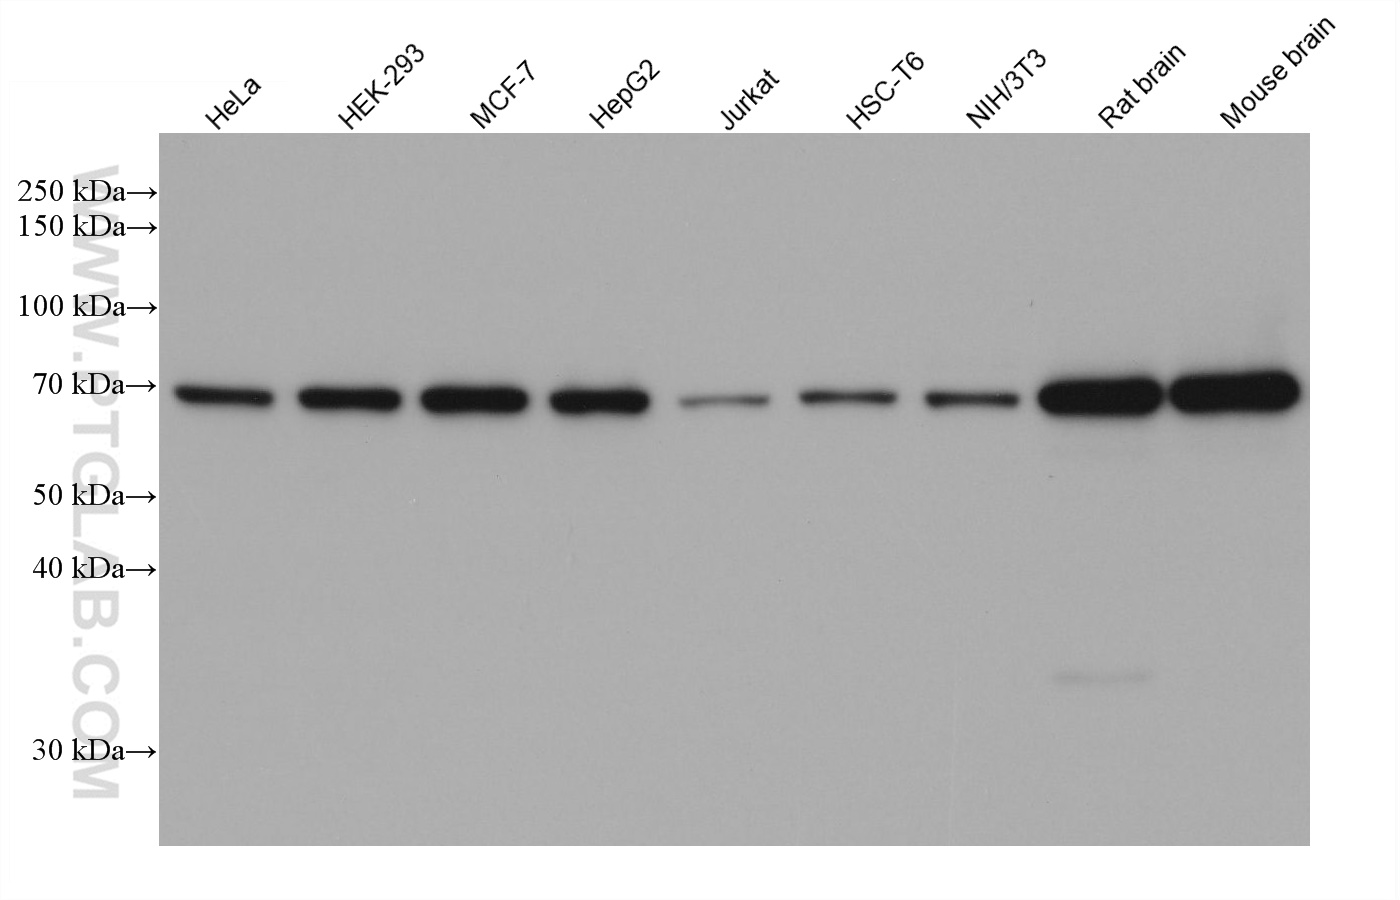  Various lysates were subjected to SDS-PAGE followed by western blot with rabbit anti-TOM70 polyclonal antibody (14528-1-AP) at dilution of 1:10000. Multi-rAb HRP-Goat Anti-Rabbit Recombinant Secondary Antibody (H+L) (RGAR001) was used at 1:5000 for detection. 